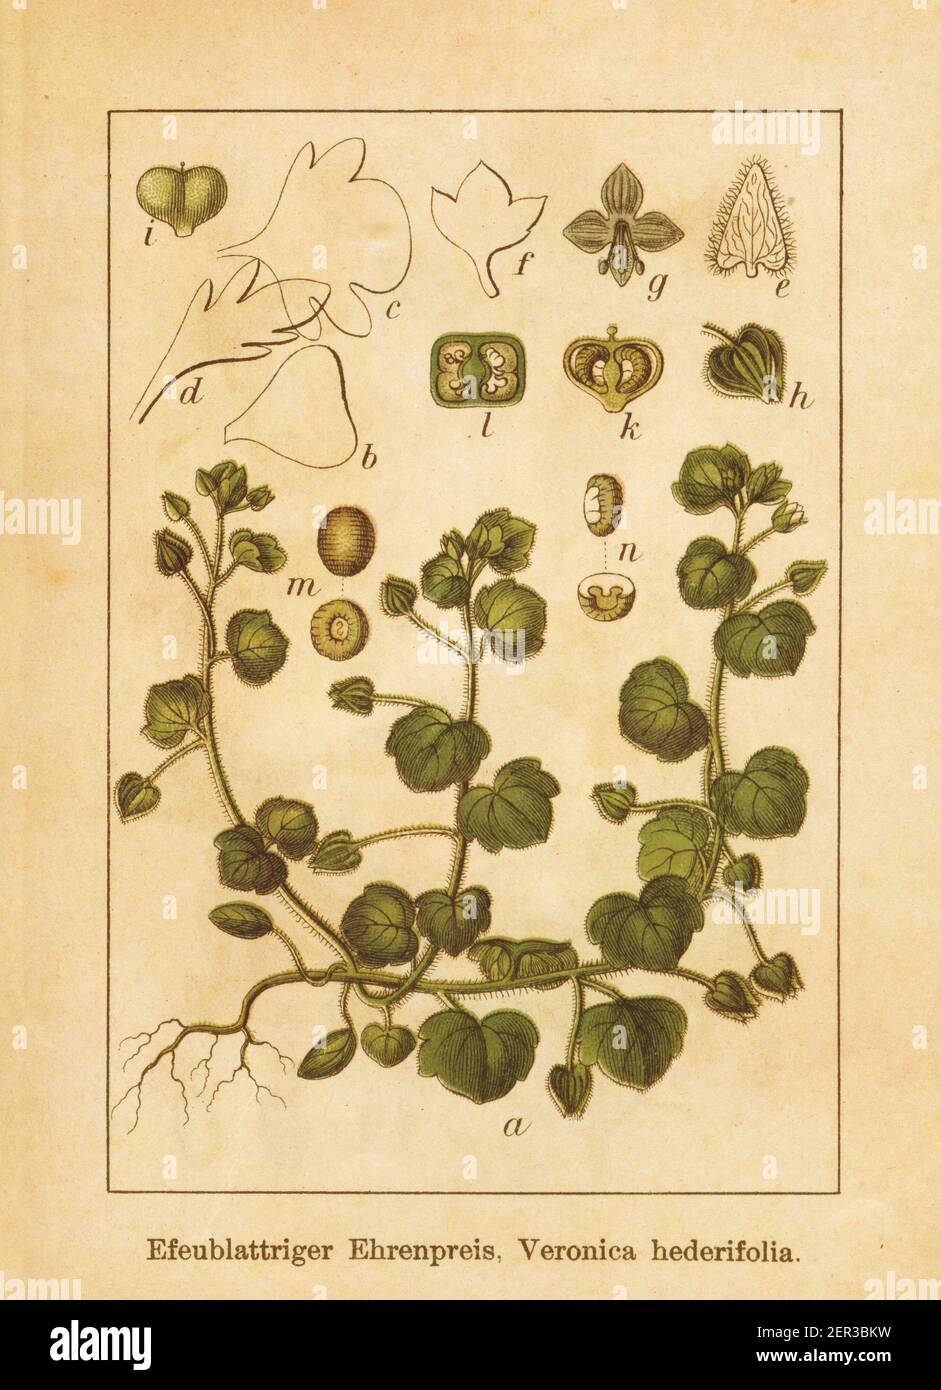 Antique illustration of a veronica hederifolia, also known as ivy-leaved speedwell or ivyleaf speedwell. Engraved by Jacob Sturm (1771-1848) and publi Stock Photo